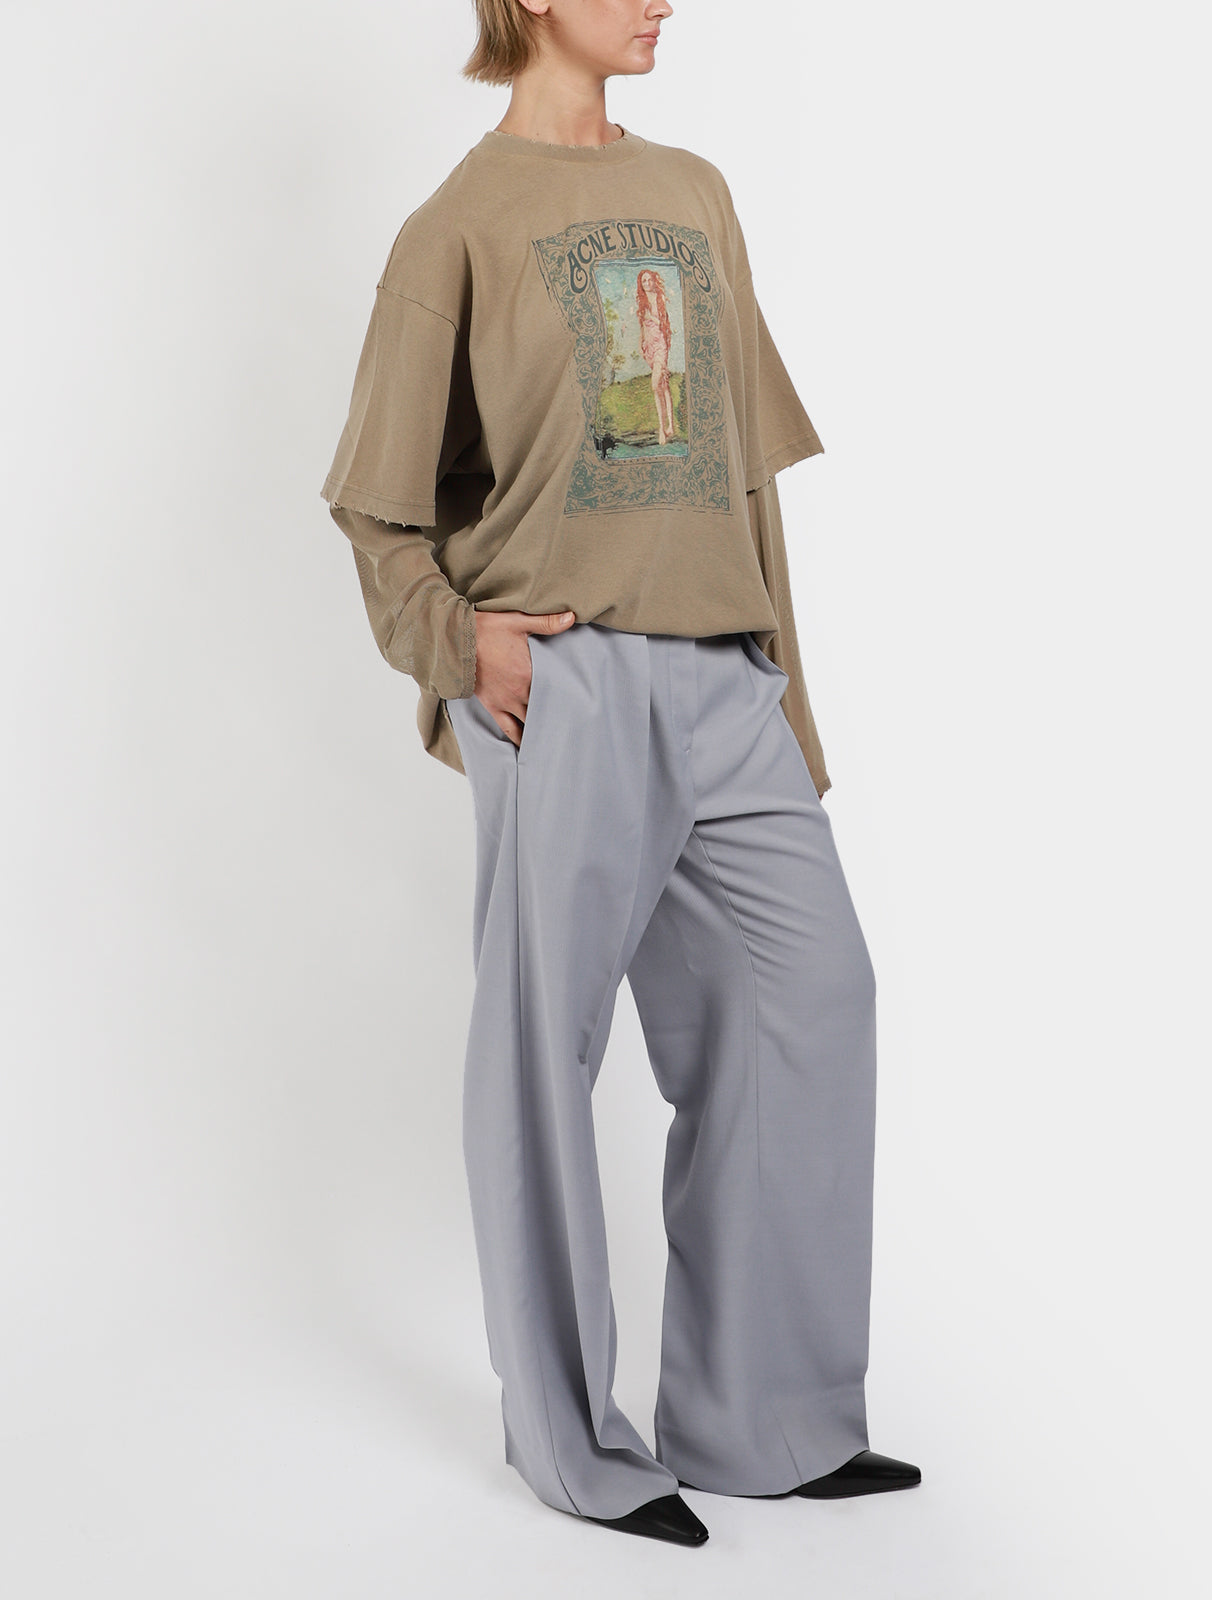 Tailored Fold Pleat Trousers